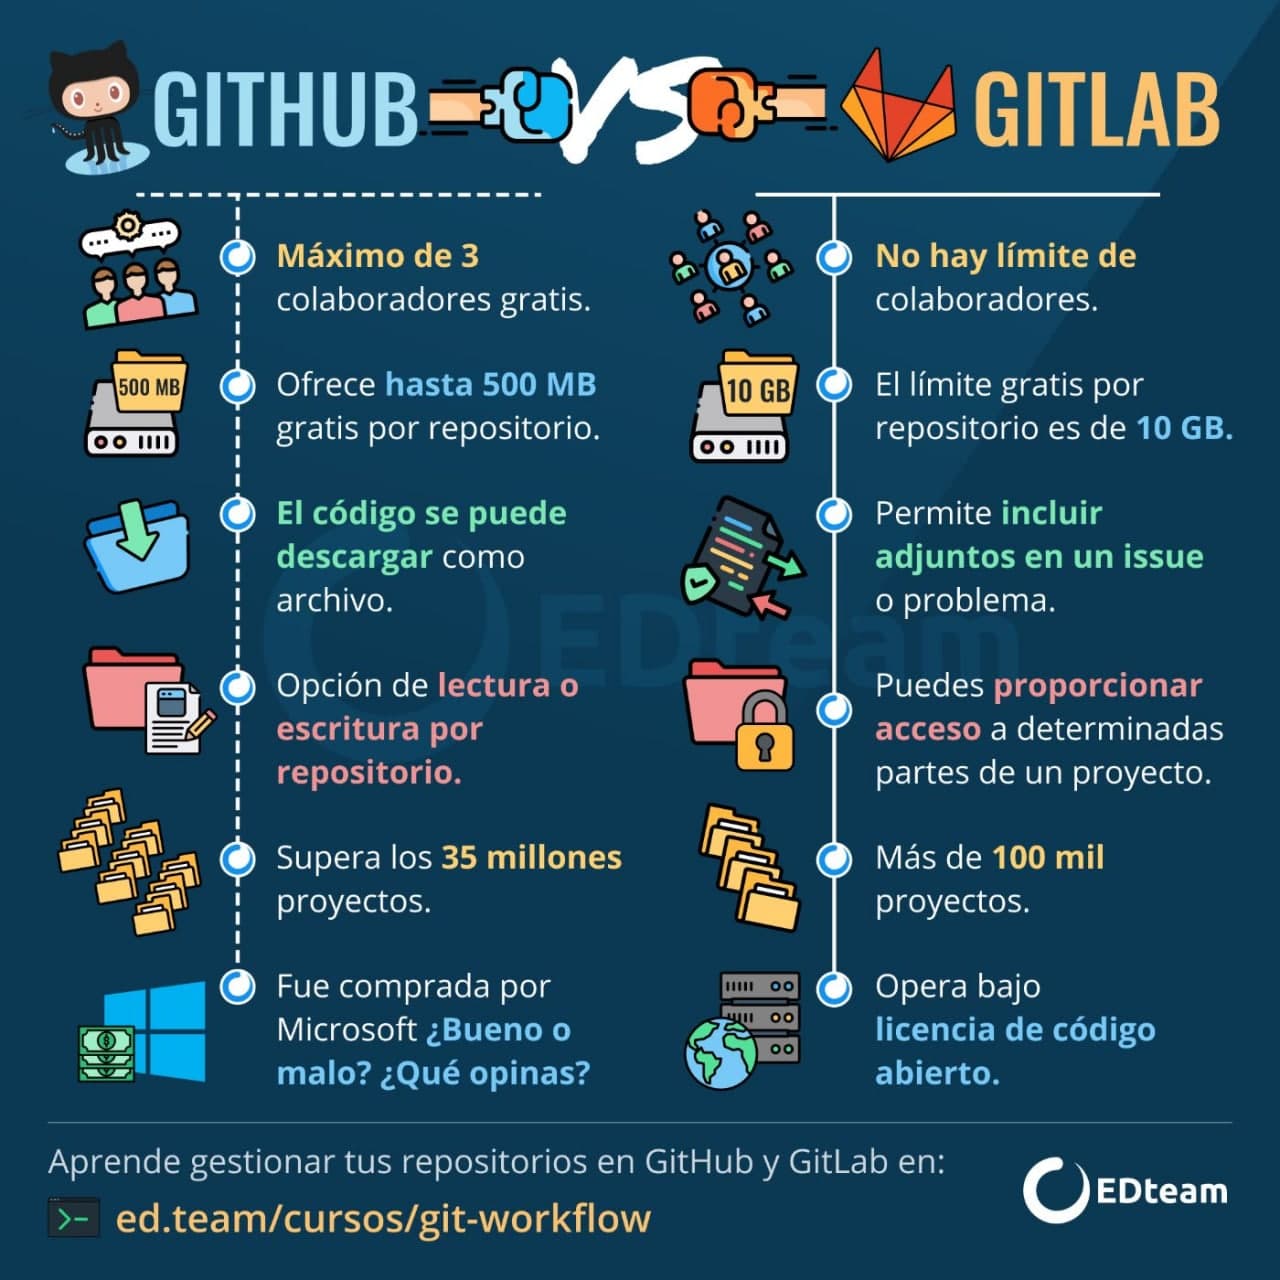 Differences between github and gitlab